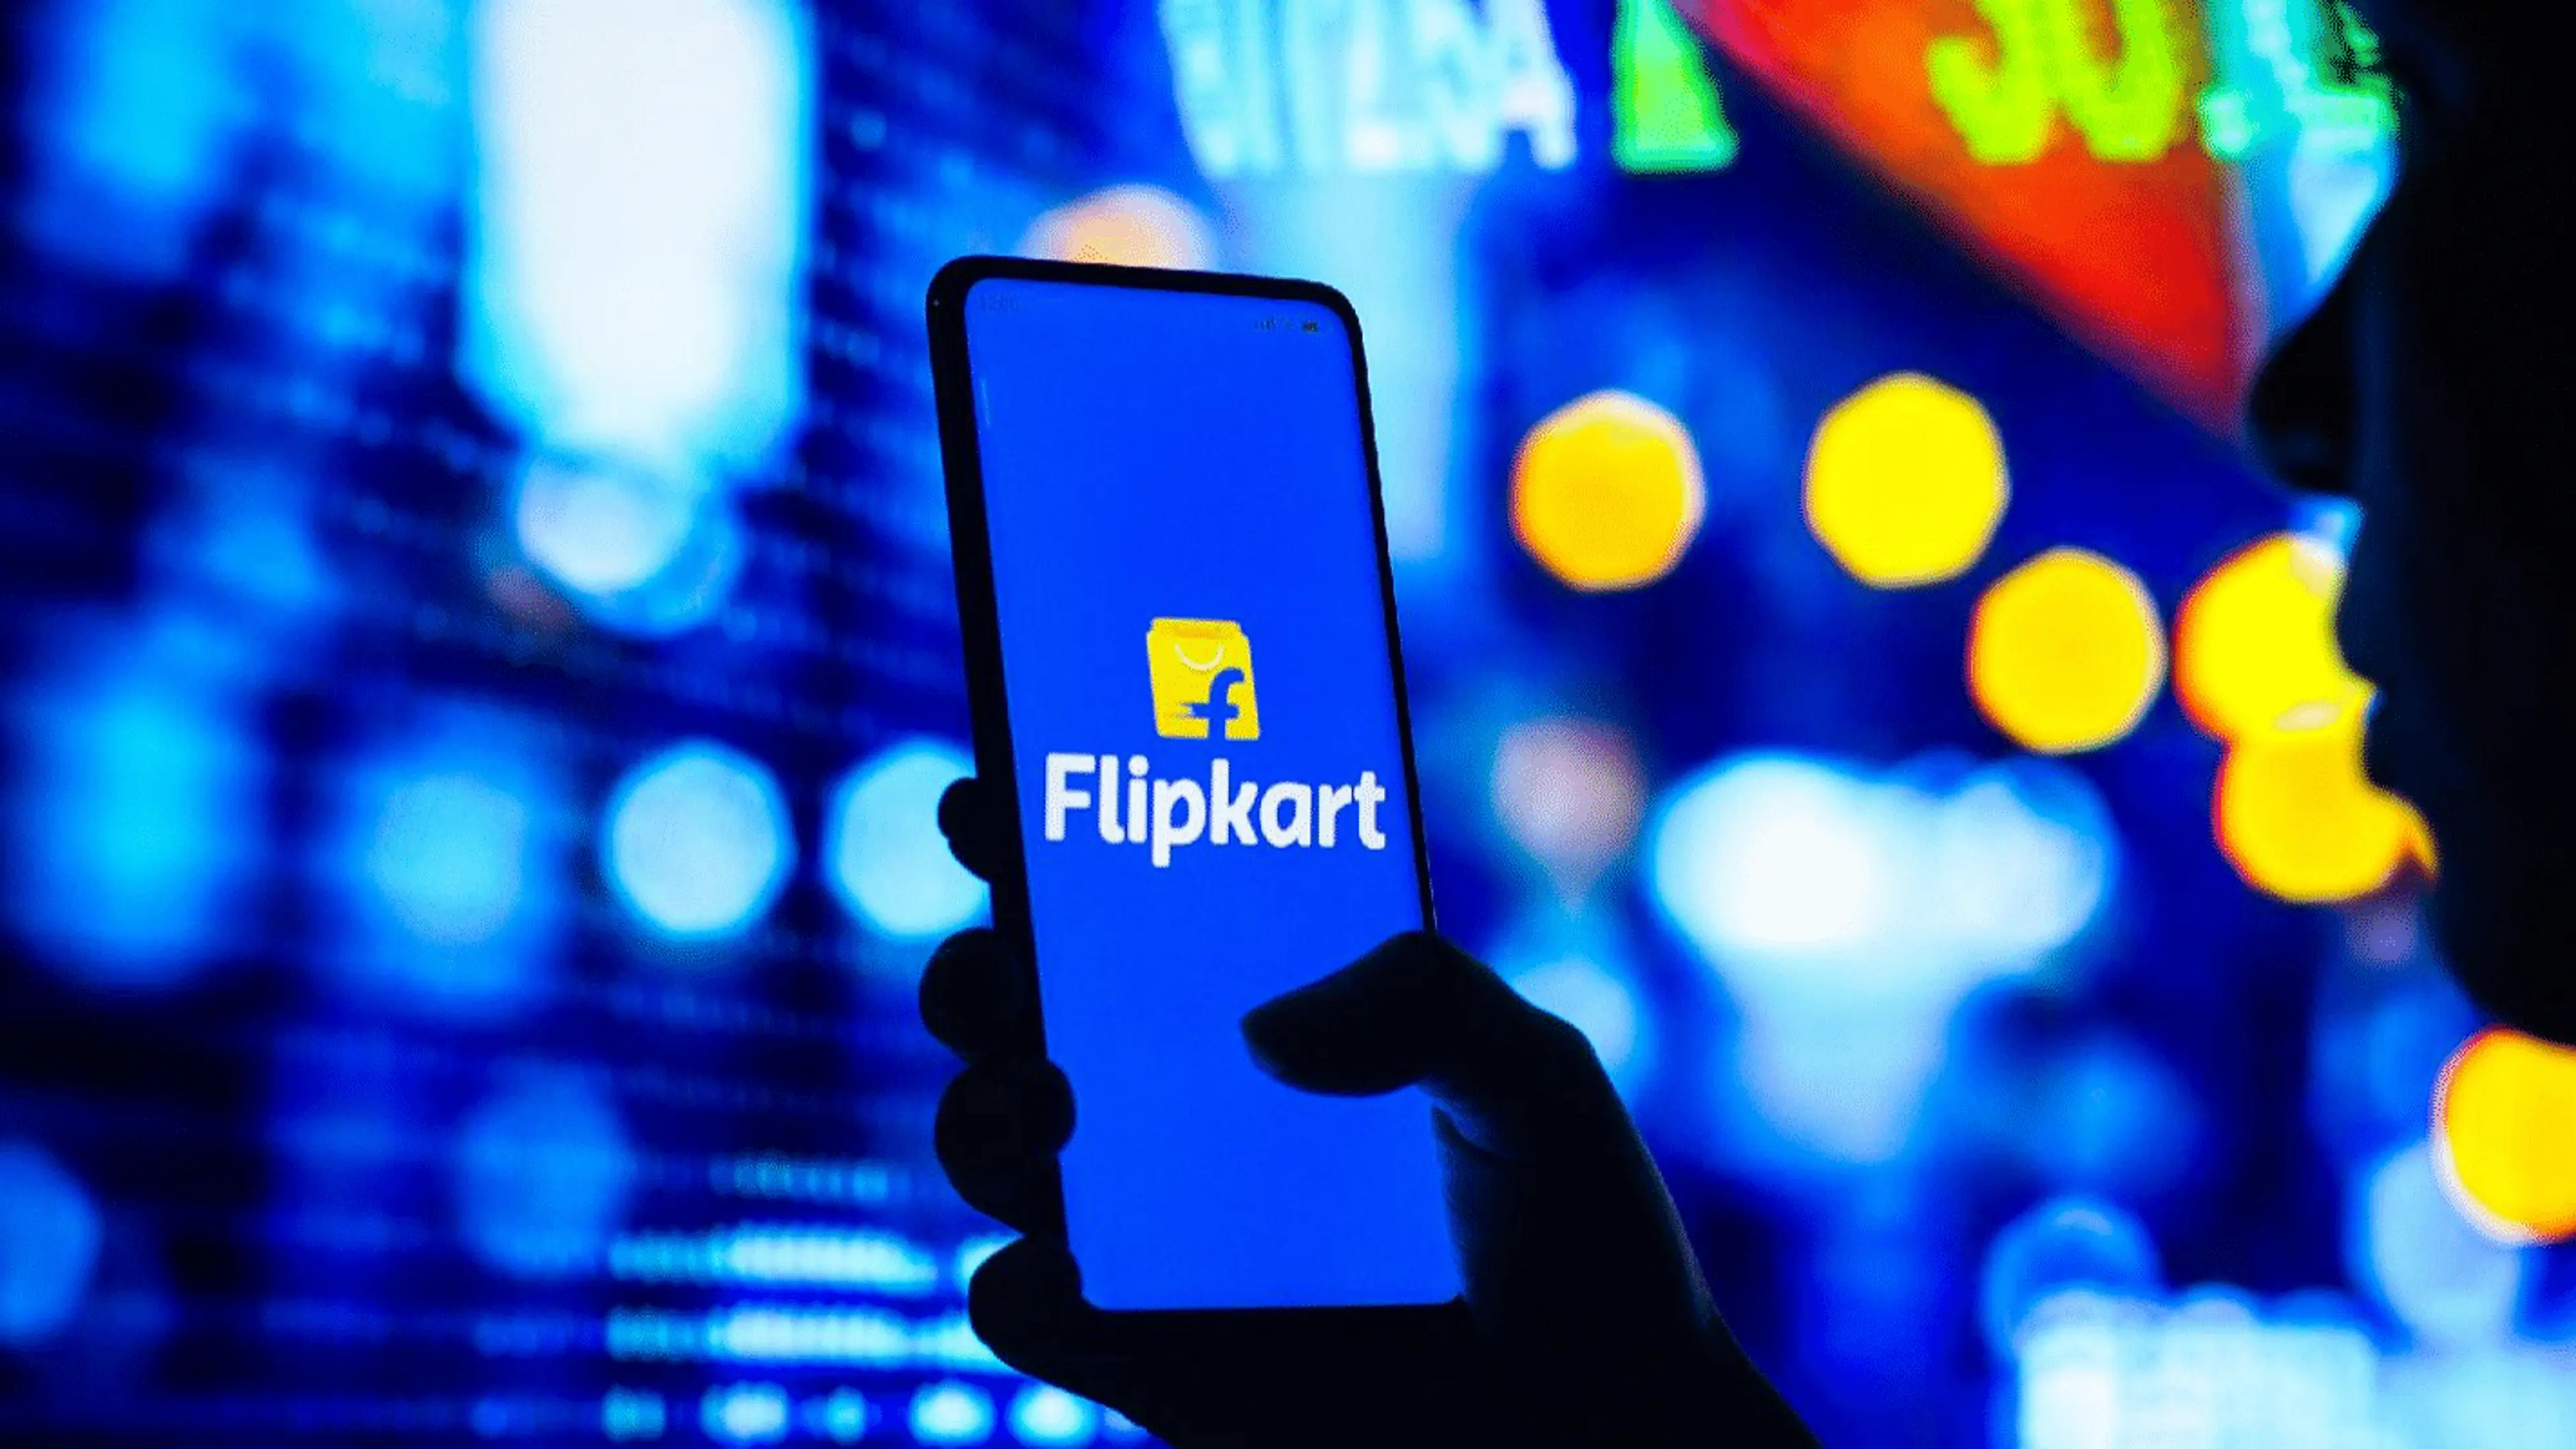 Flipkart mulls moving HQ to India ahead of IPO: Report